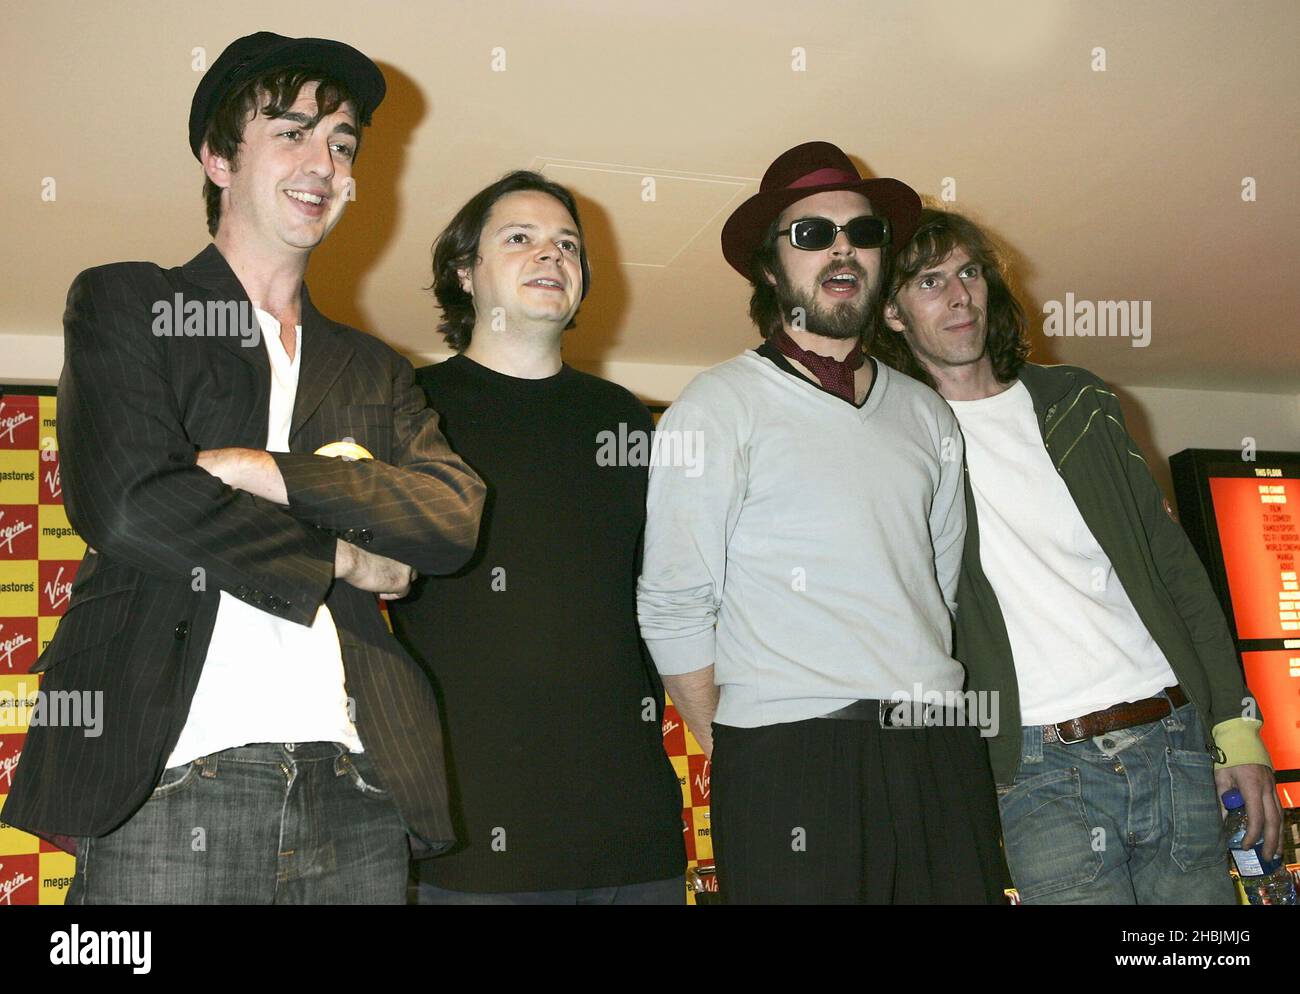 Danny Goffey; Mick Quinn; Gaz Coombes; Rob Coombes of Supergrass sign copies of their latest album "Road To Rouen", at the Virgin Megastore Piccadilly on August 17, 2005 in London. Stock Photo